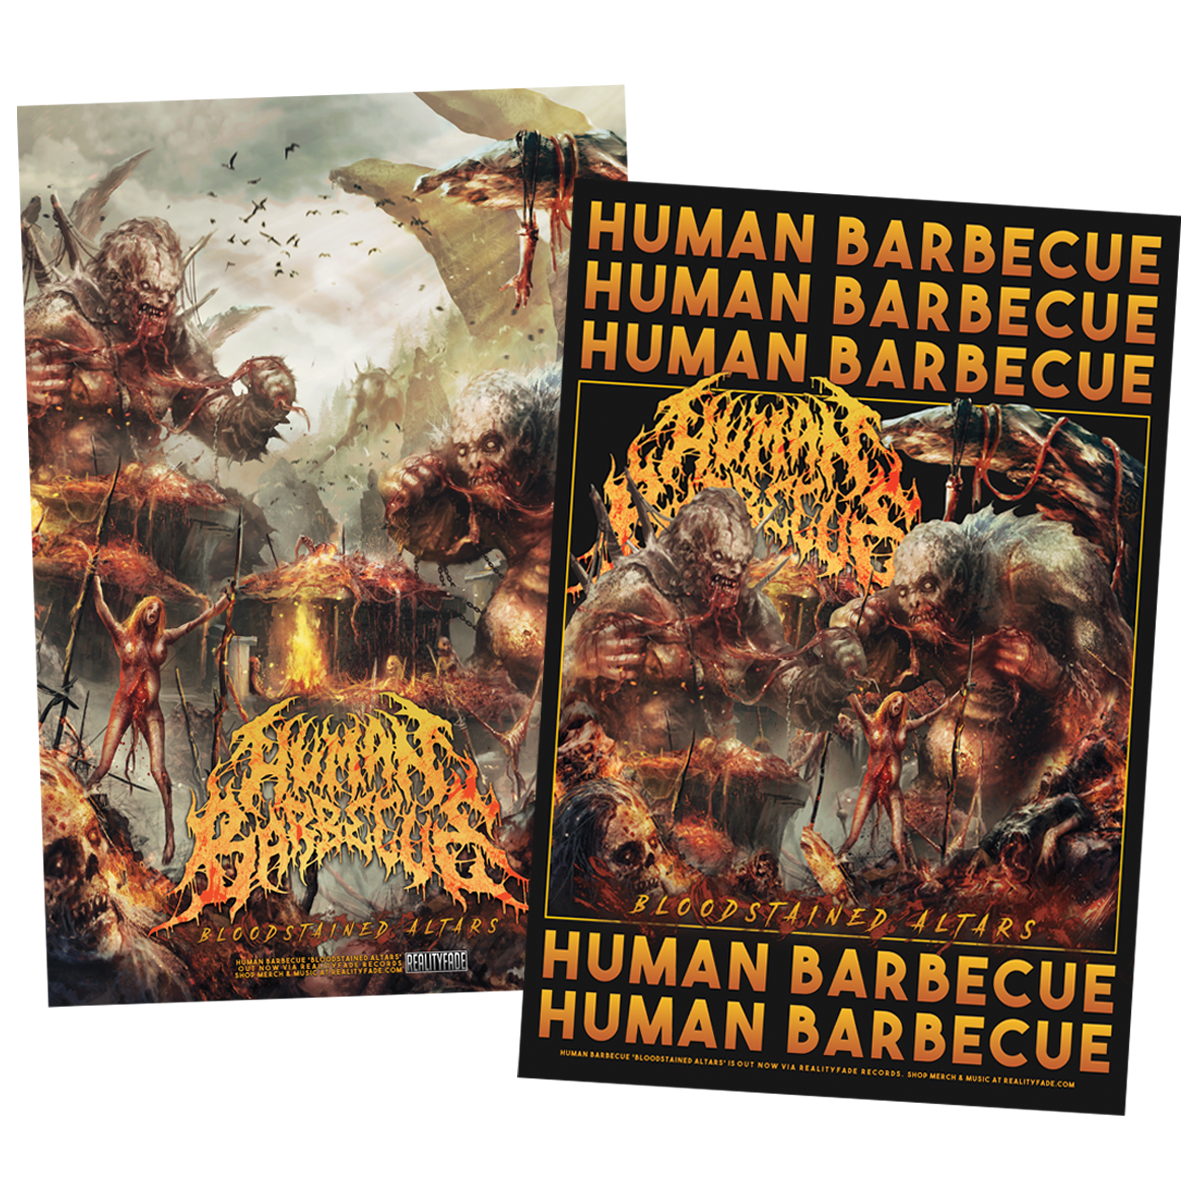 Human Barbecue ‘Bloodstained Altars’ Poster